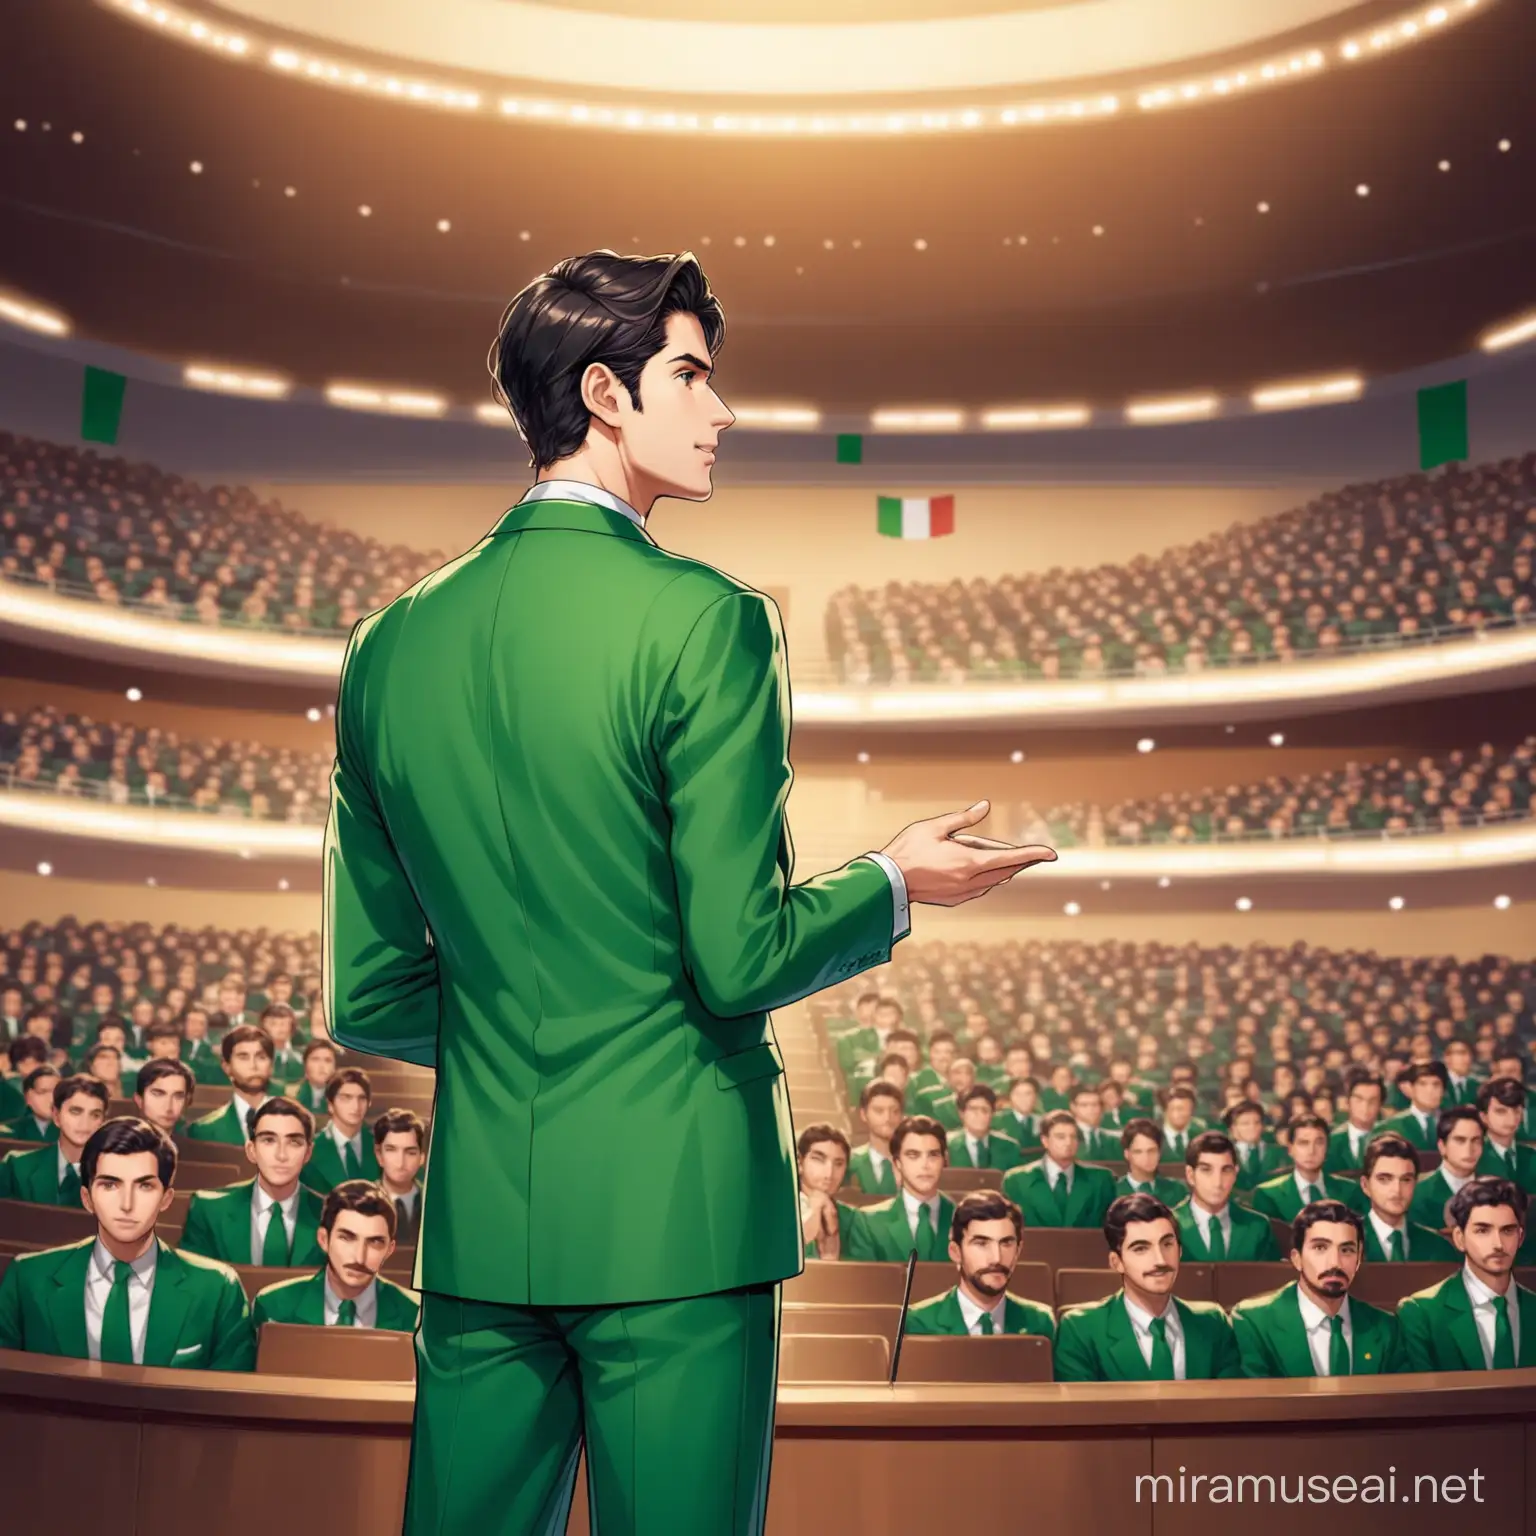 The background is a large auditorium in Italy.

The Italian flag stands on the wall of the auditorium.

A handsome gentleman in his early 20s is giving a lecture in front of many people.

This gentleman is wearing a green suit set. The shoes are black.